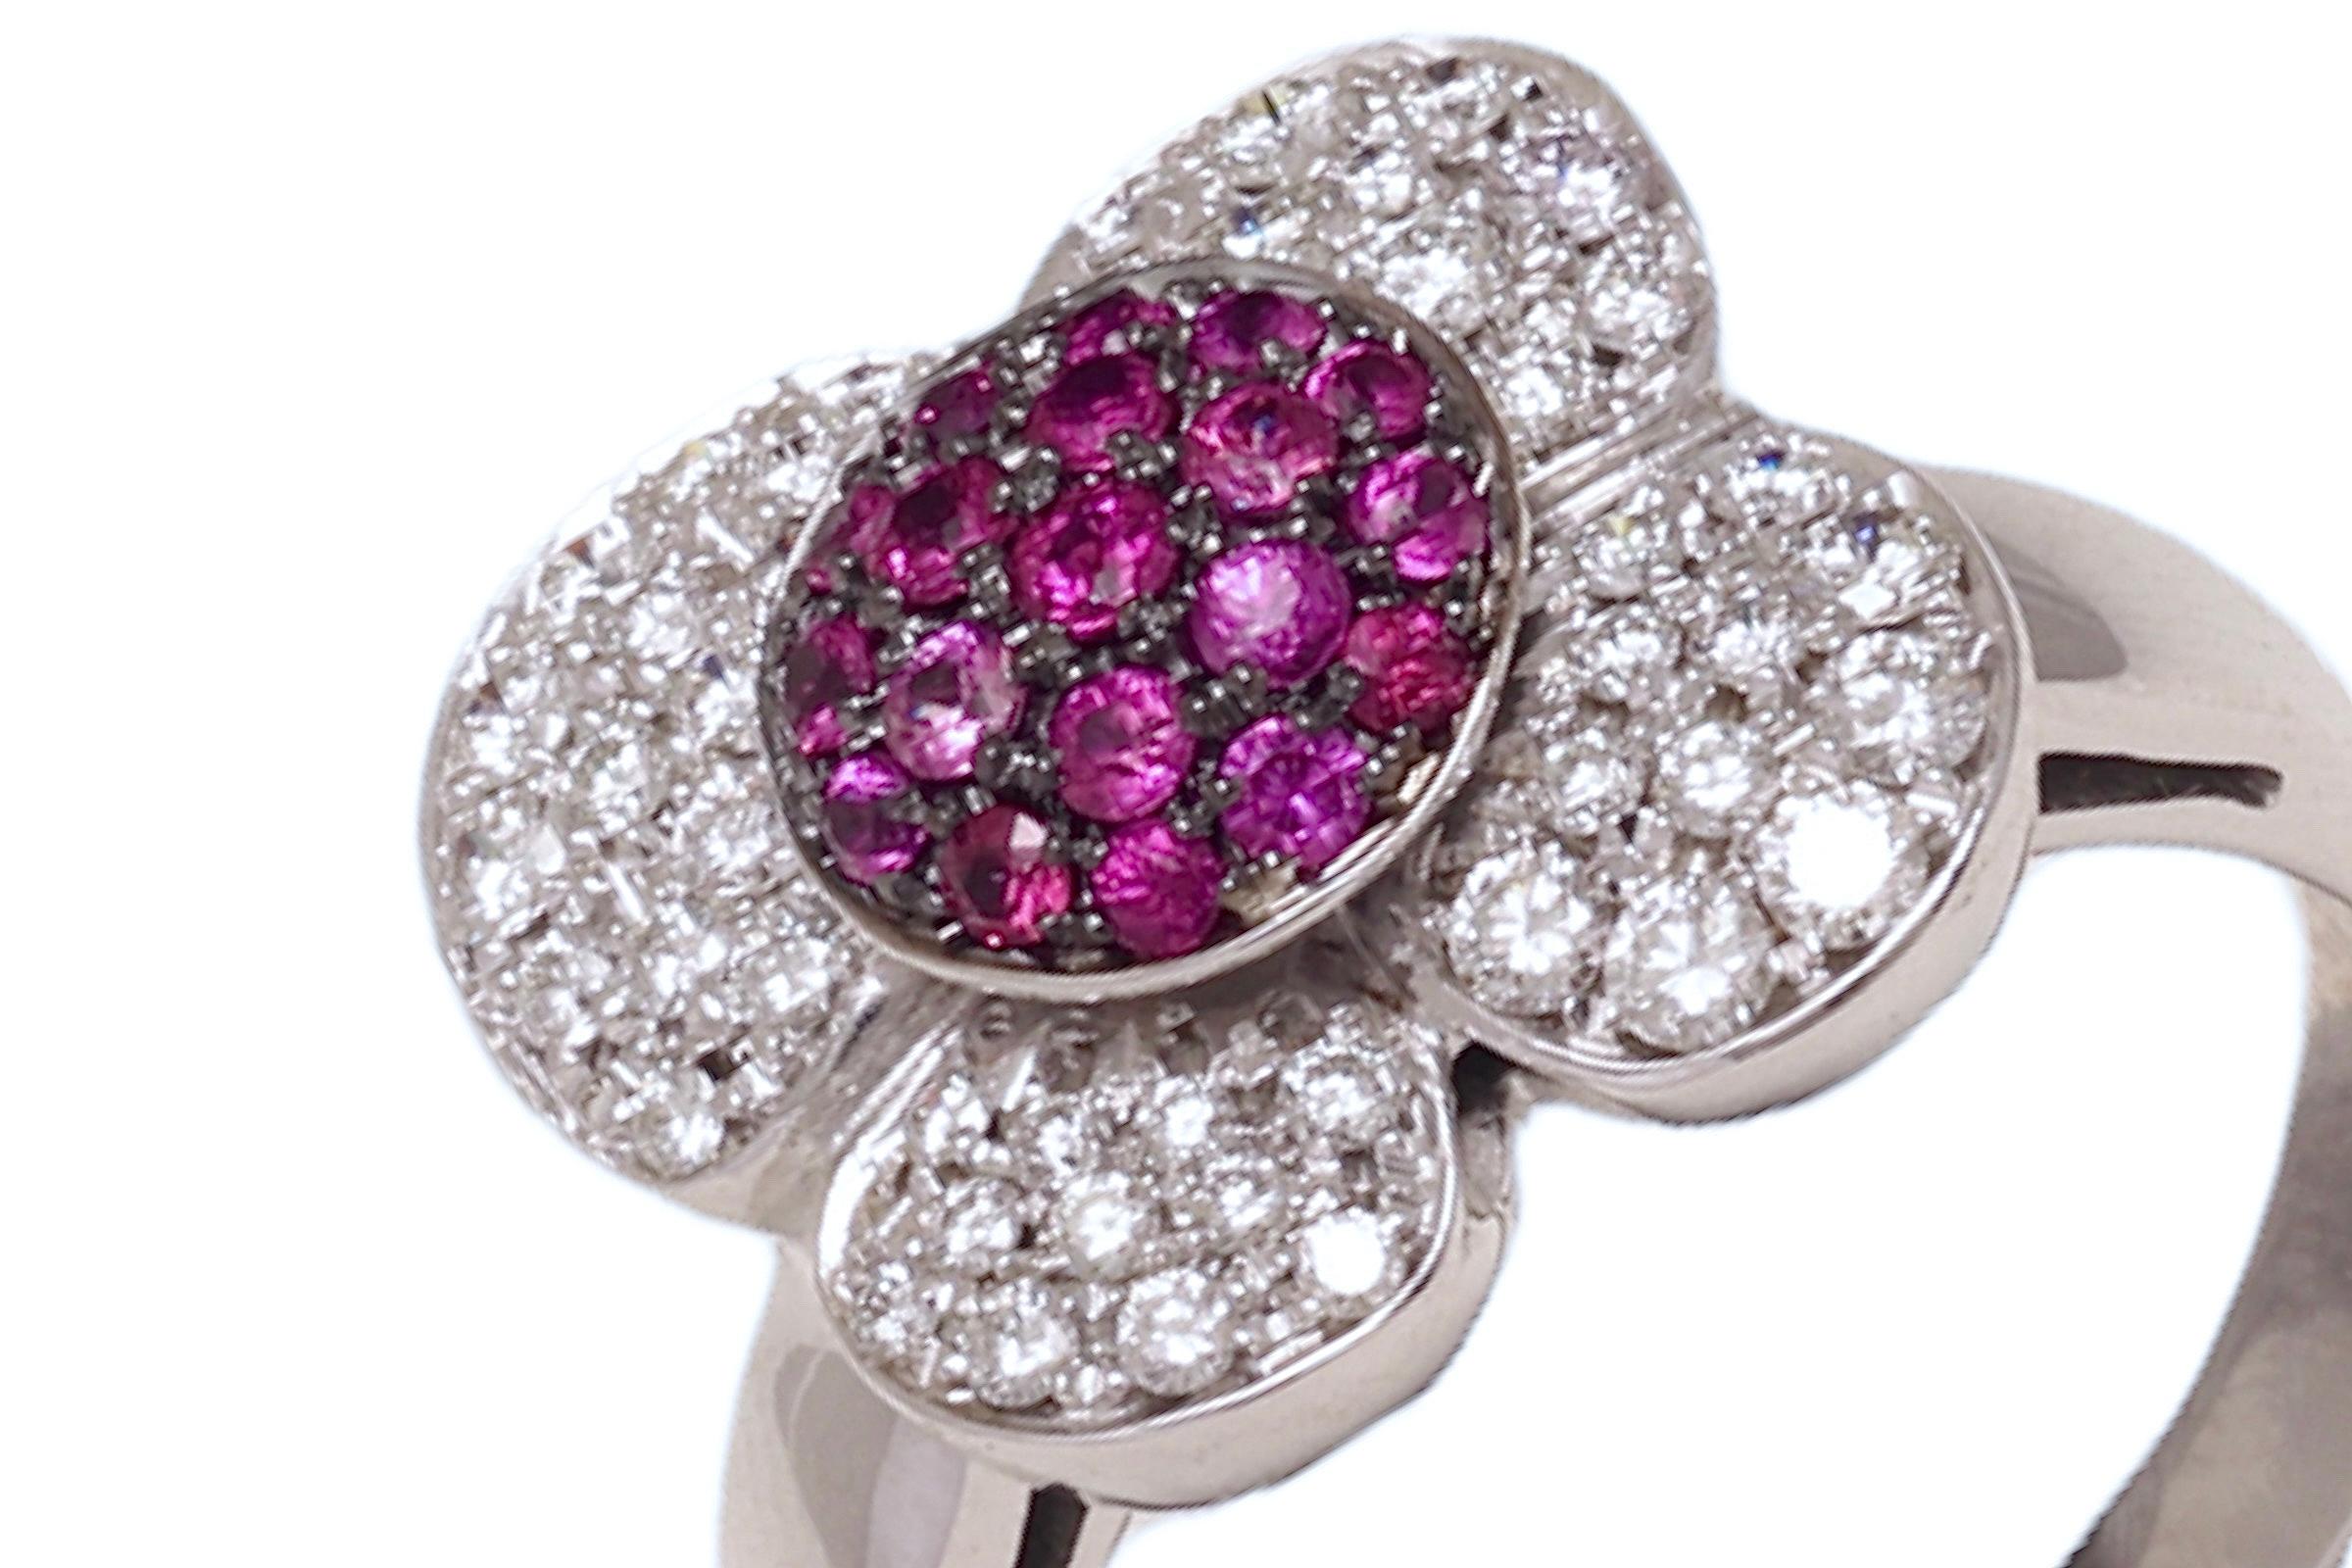 Gorgeous 18 kt. White Gold Flower Shape Ring with 1 ct. Diamonds and 0.5 ct. Pink Sapphire 

Diamonds: 1 ct. brilliant cut diamonds

Sapphires: 0.5 ct. Pink Sapphires

Material: 18 kt. white gold + black rhodium 

Ring size: 54.5 EU / 7 US, can be